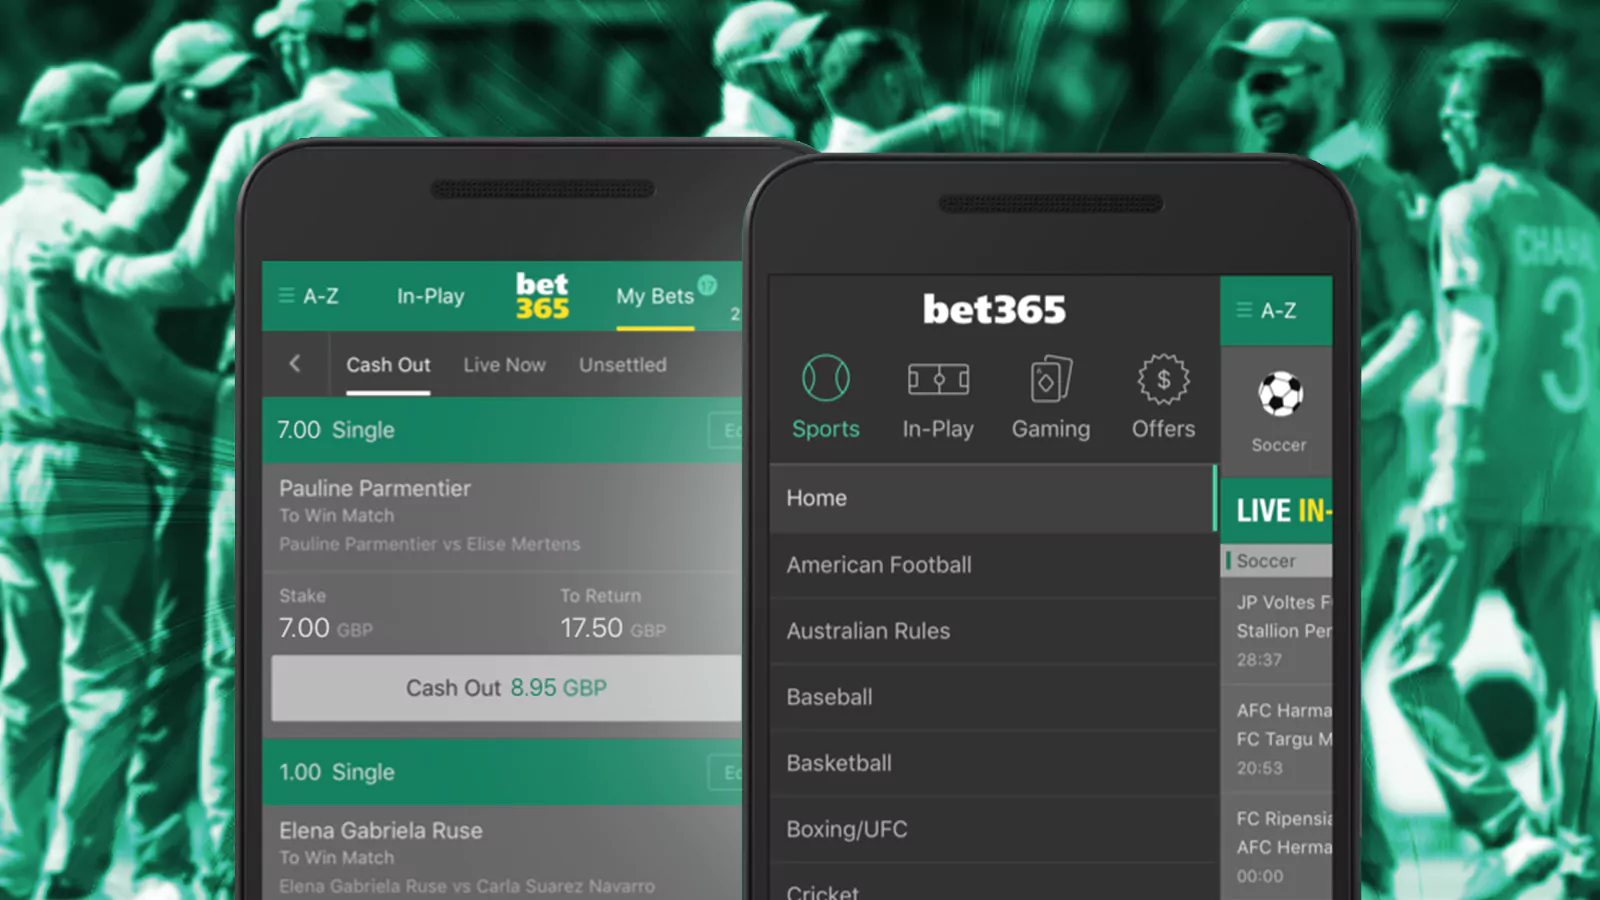 You can place bets with the help of the website or the mobile app.